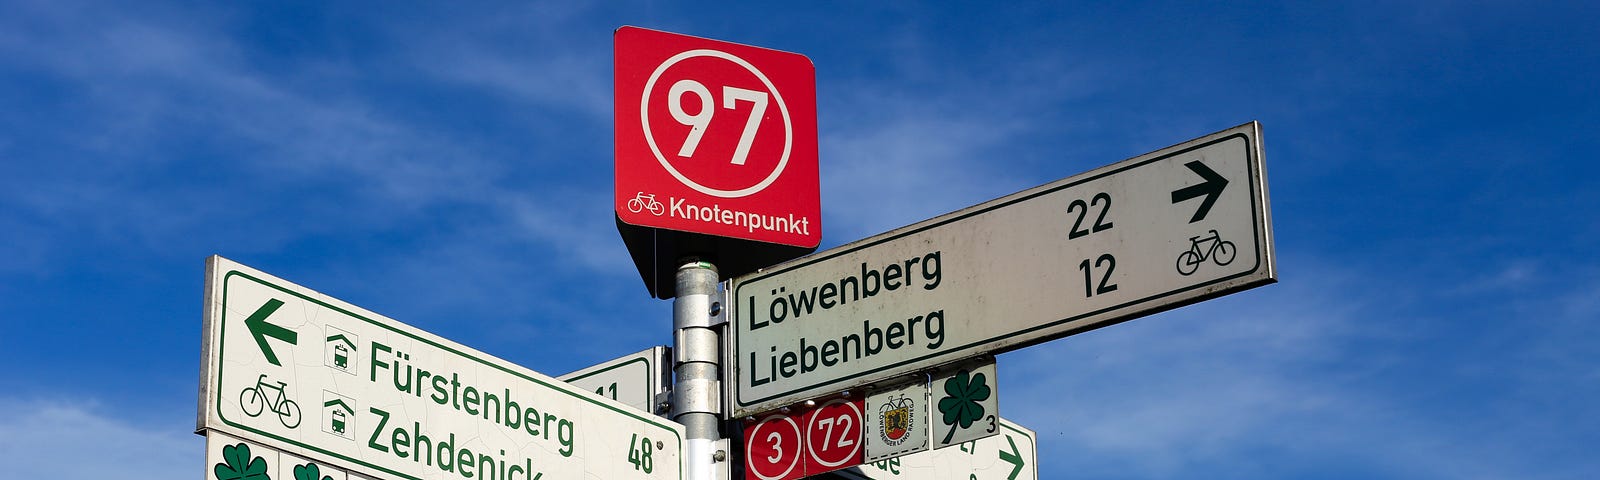 A German road sign showing distances by car and bike to nearby towns.